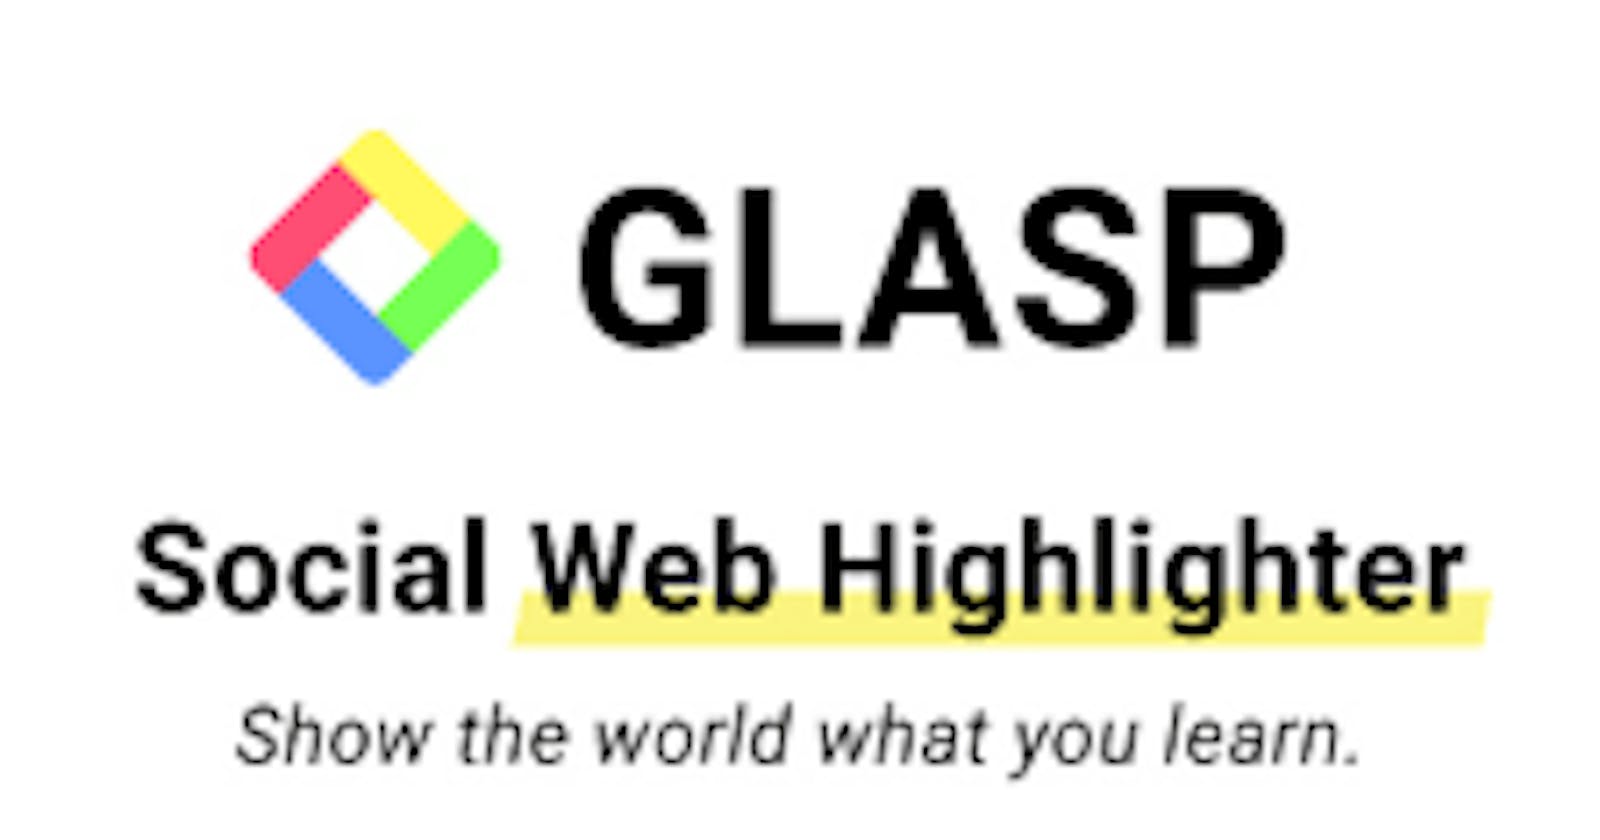 How to Highlight  and Take Notes on the Internet using GLASP